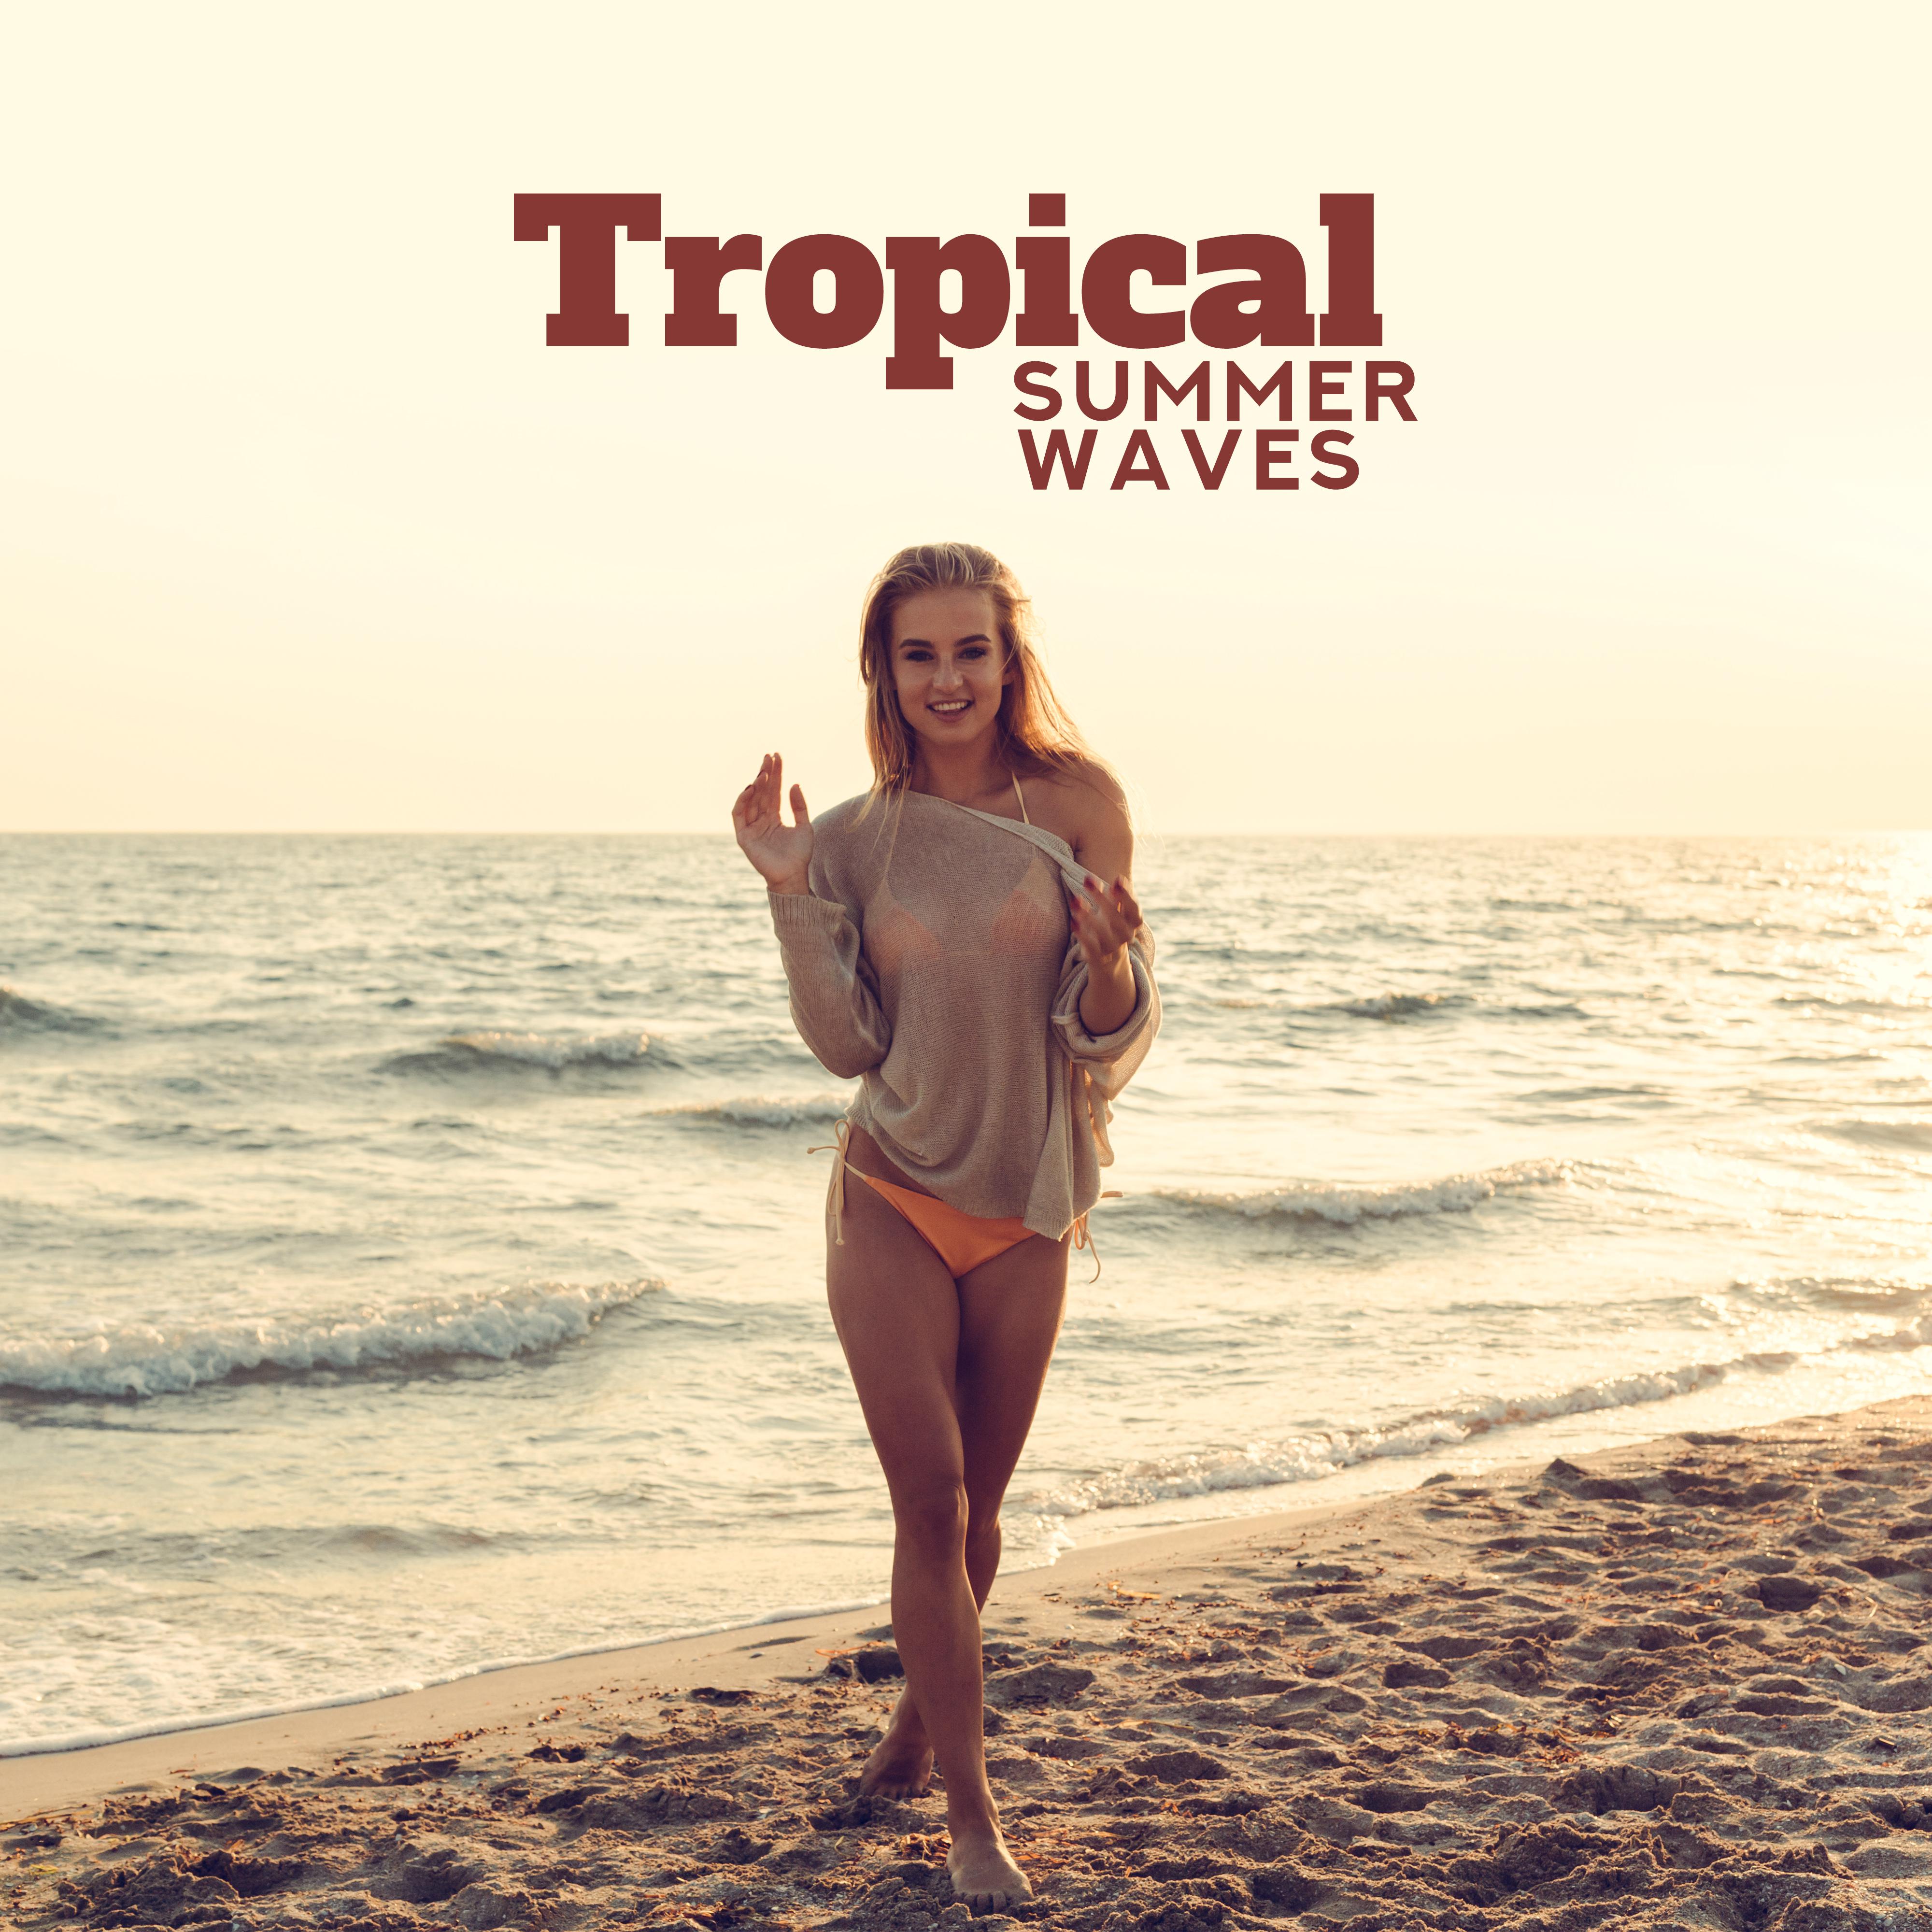 Tropical Summer Waves: Music for the Time of Summer Rest, Relaxation and Chillout